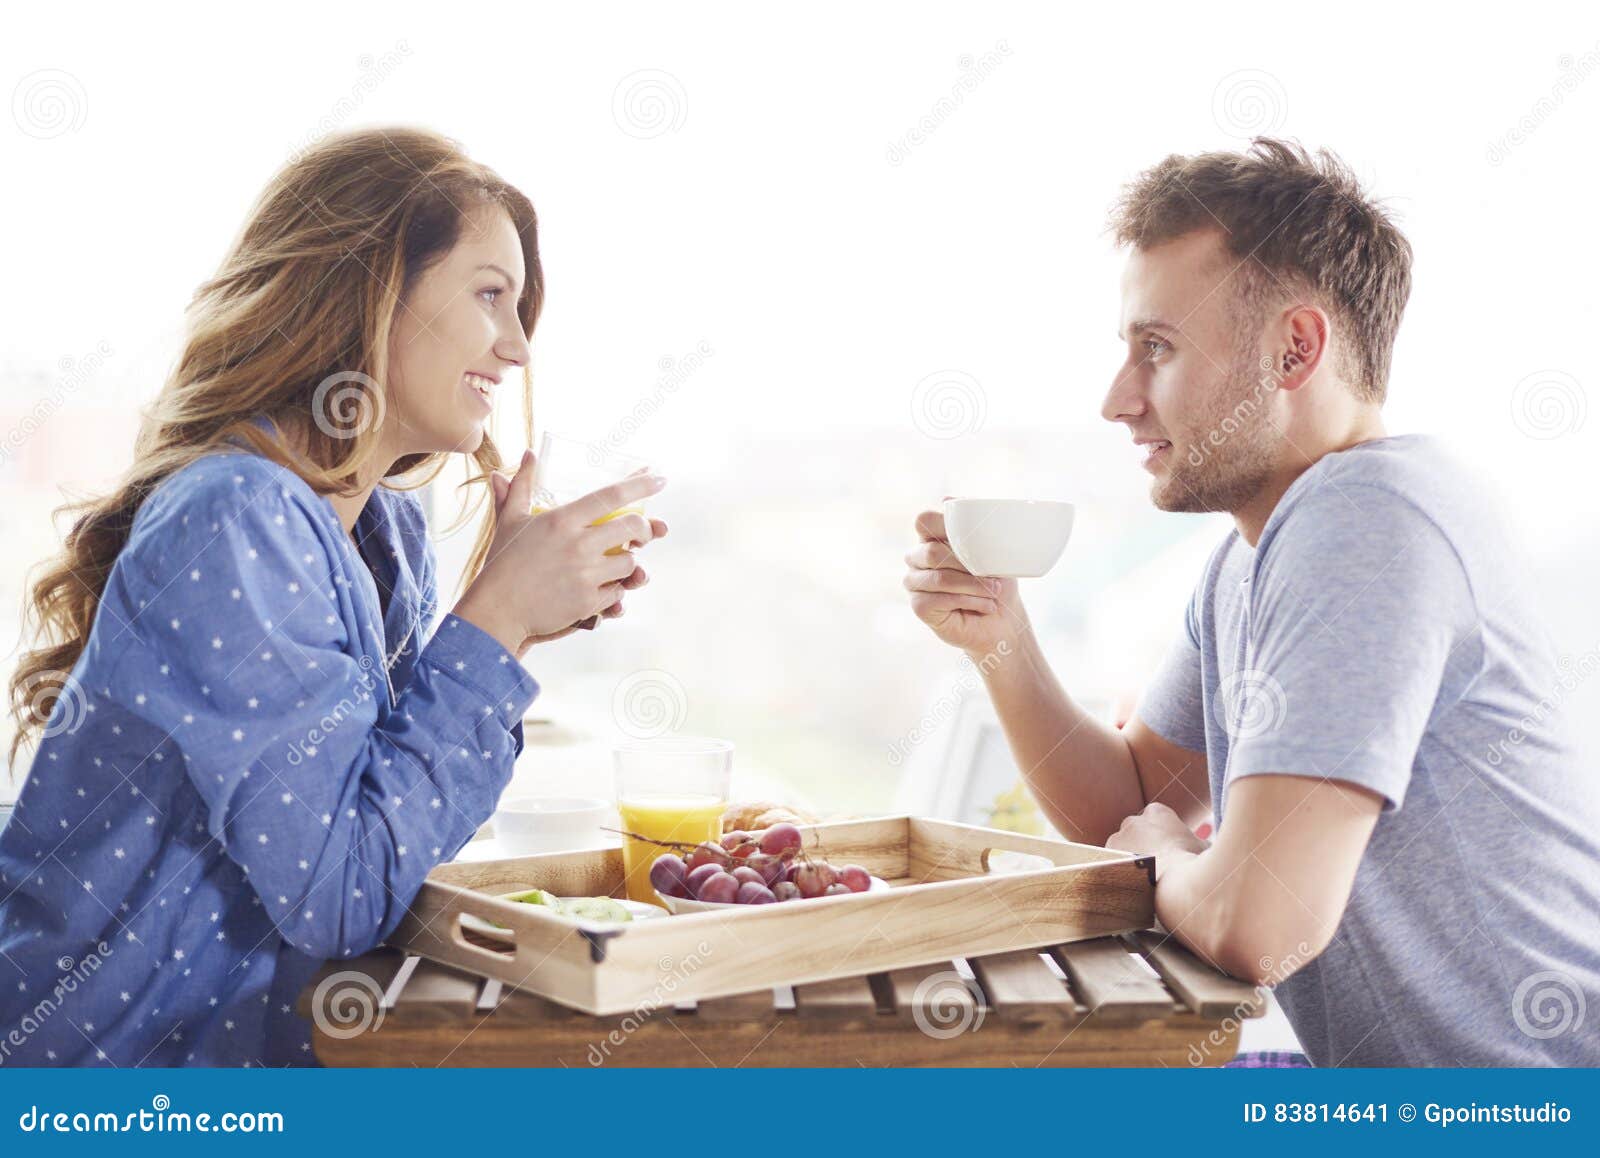 Couple during breakfast stock image. Image of interior - 83814641